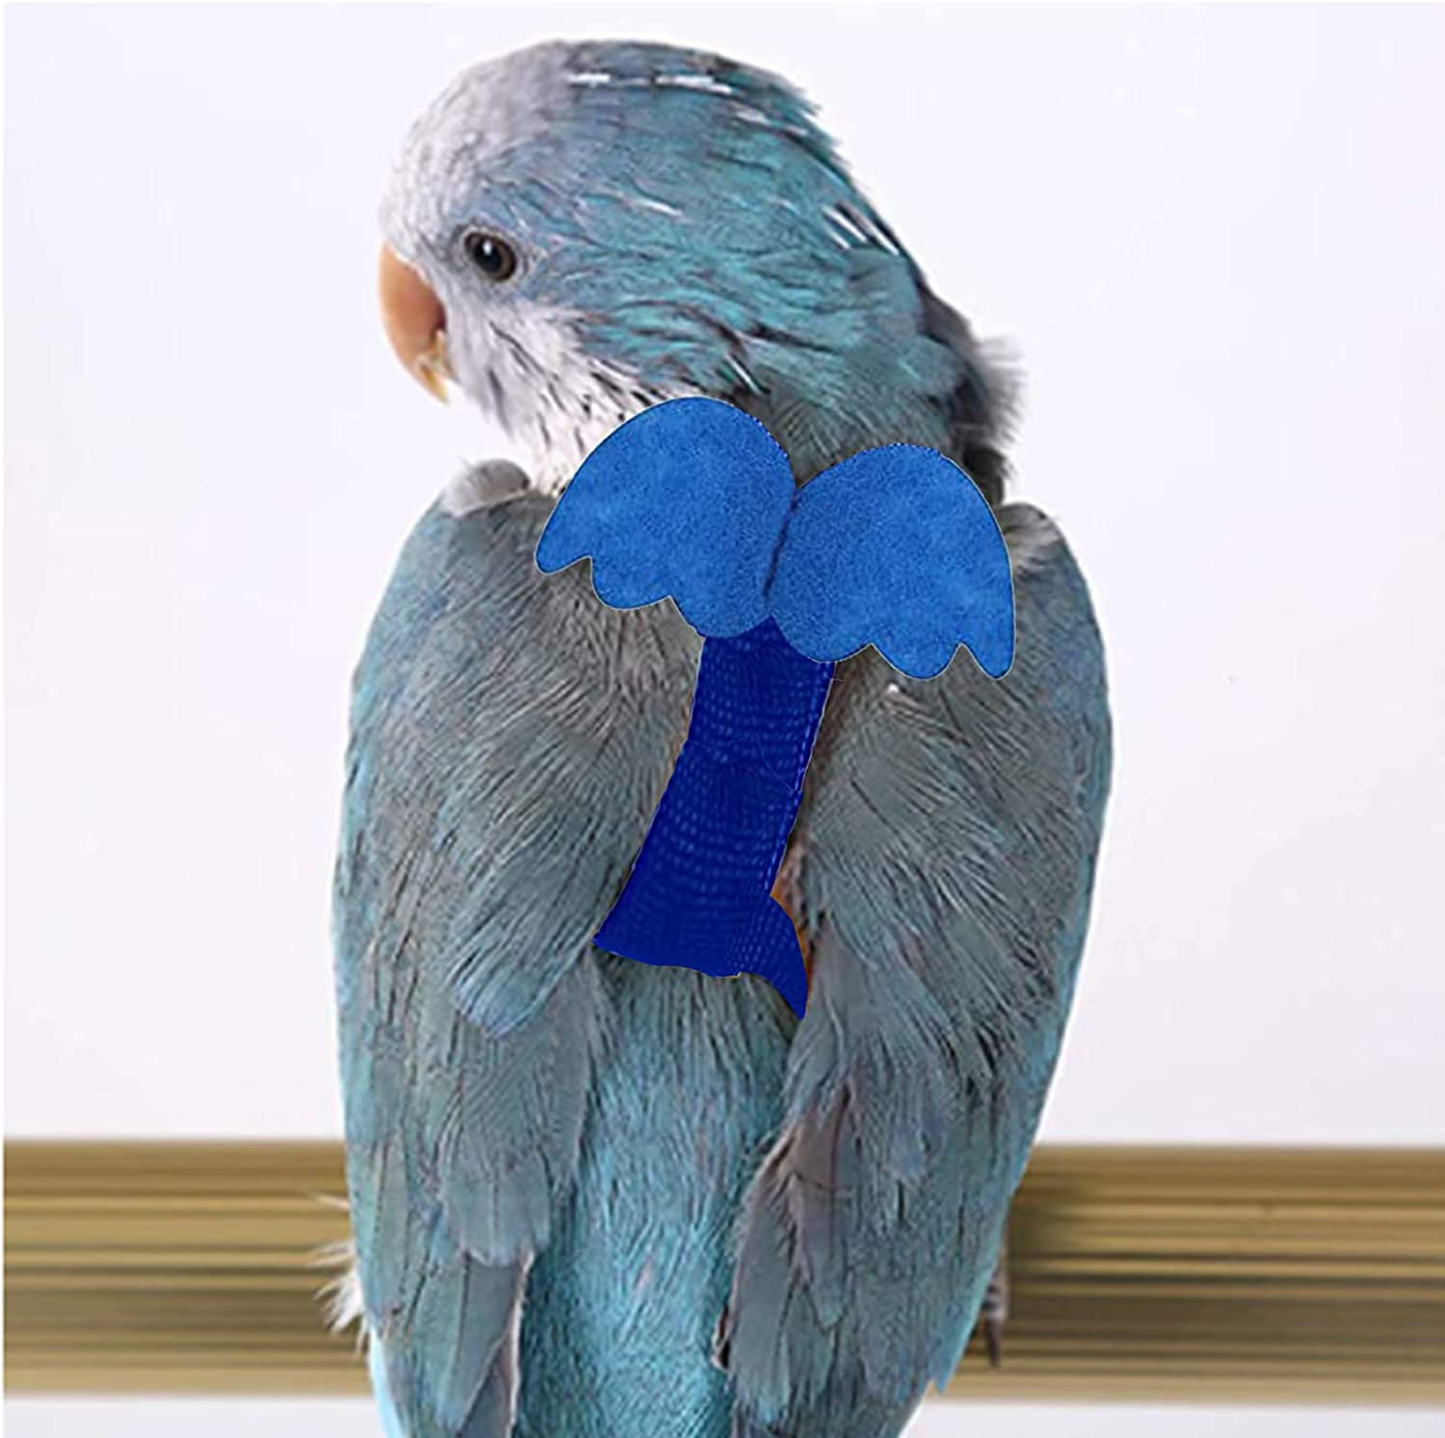 Pet Parrot Bird Harness and Leash, Adjustable Training Design Anti-Bite, Bird Nylon Rope with Cute Wing for Parrots, Suitable for Alexandrine, Scarlet, Keck, Mini Macaw and Same Size Birds